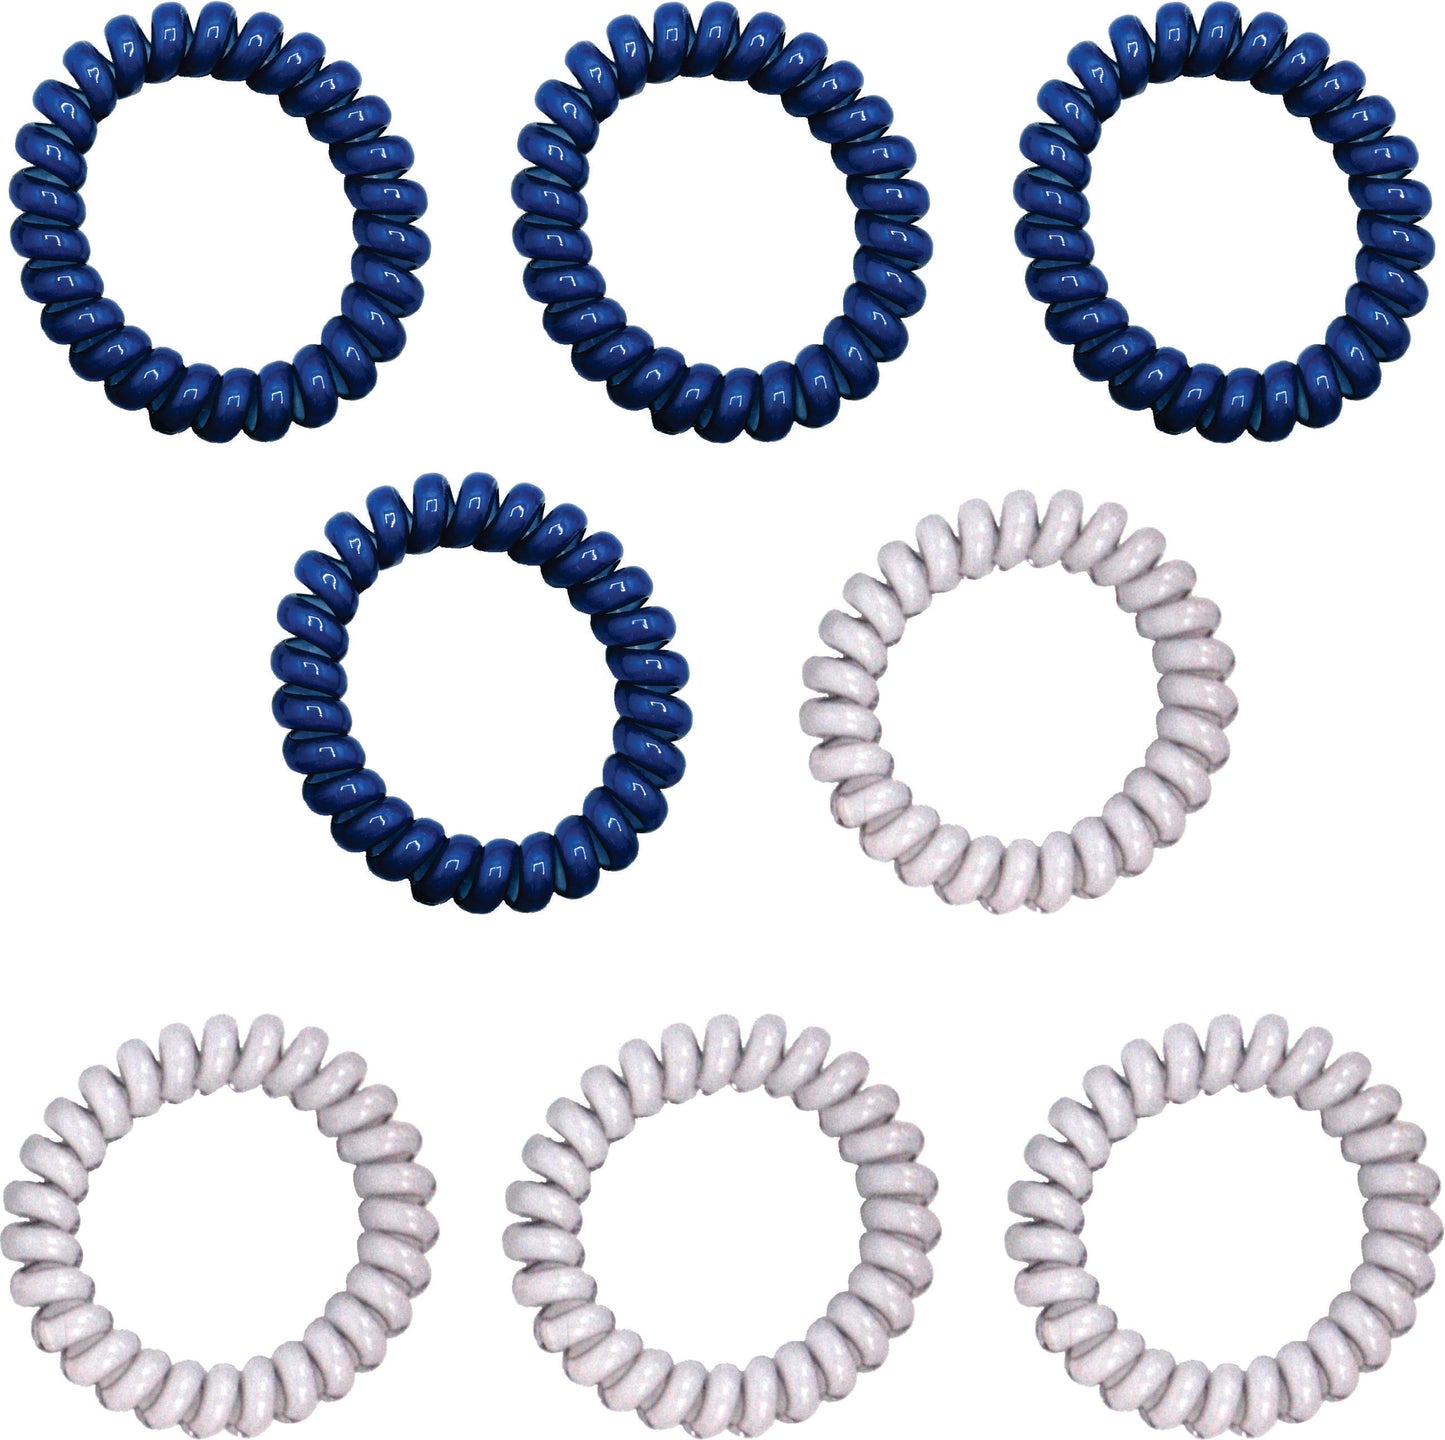 Amelia Beauty Products 8 Medium Elastic Hair Coils, 2.0in Diameter Thick Spiral Hair Ties, Gentle on Hair, Strong Hold and Minimizes Dents and Creases, Blue and White Mix